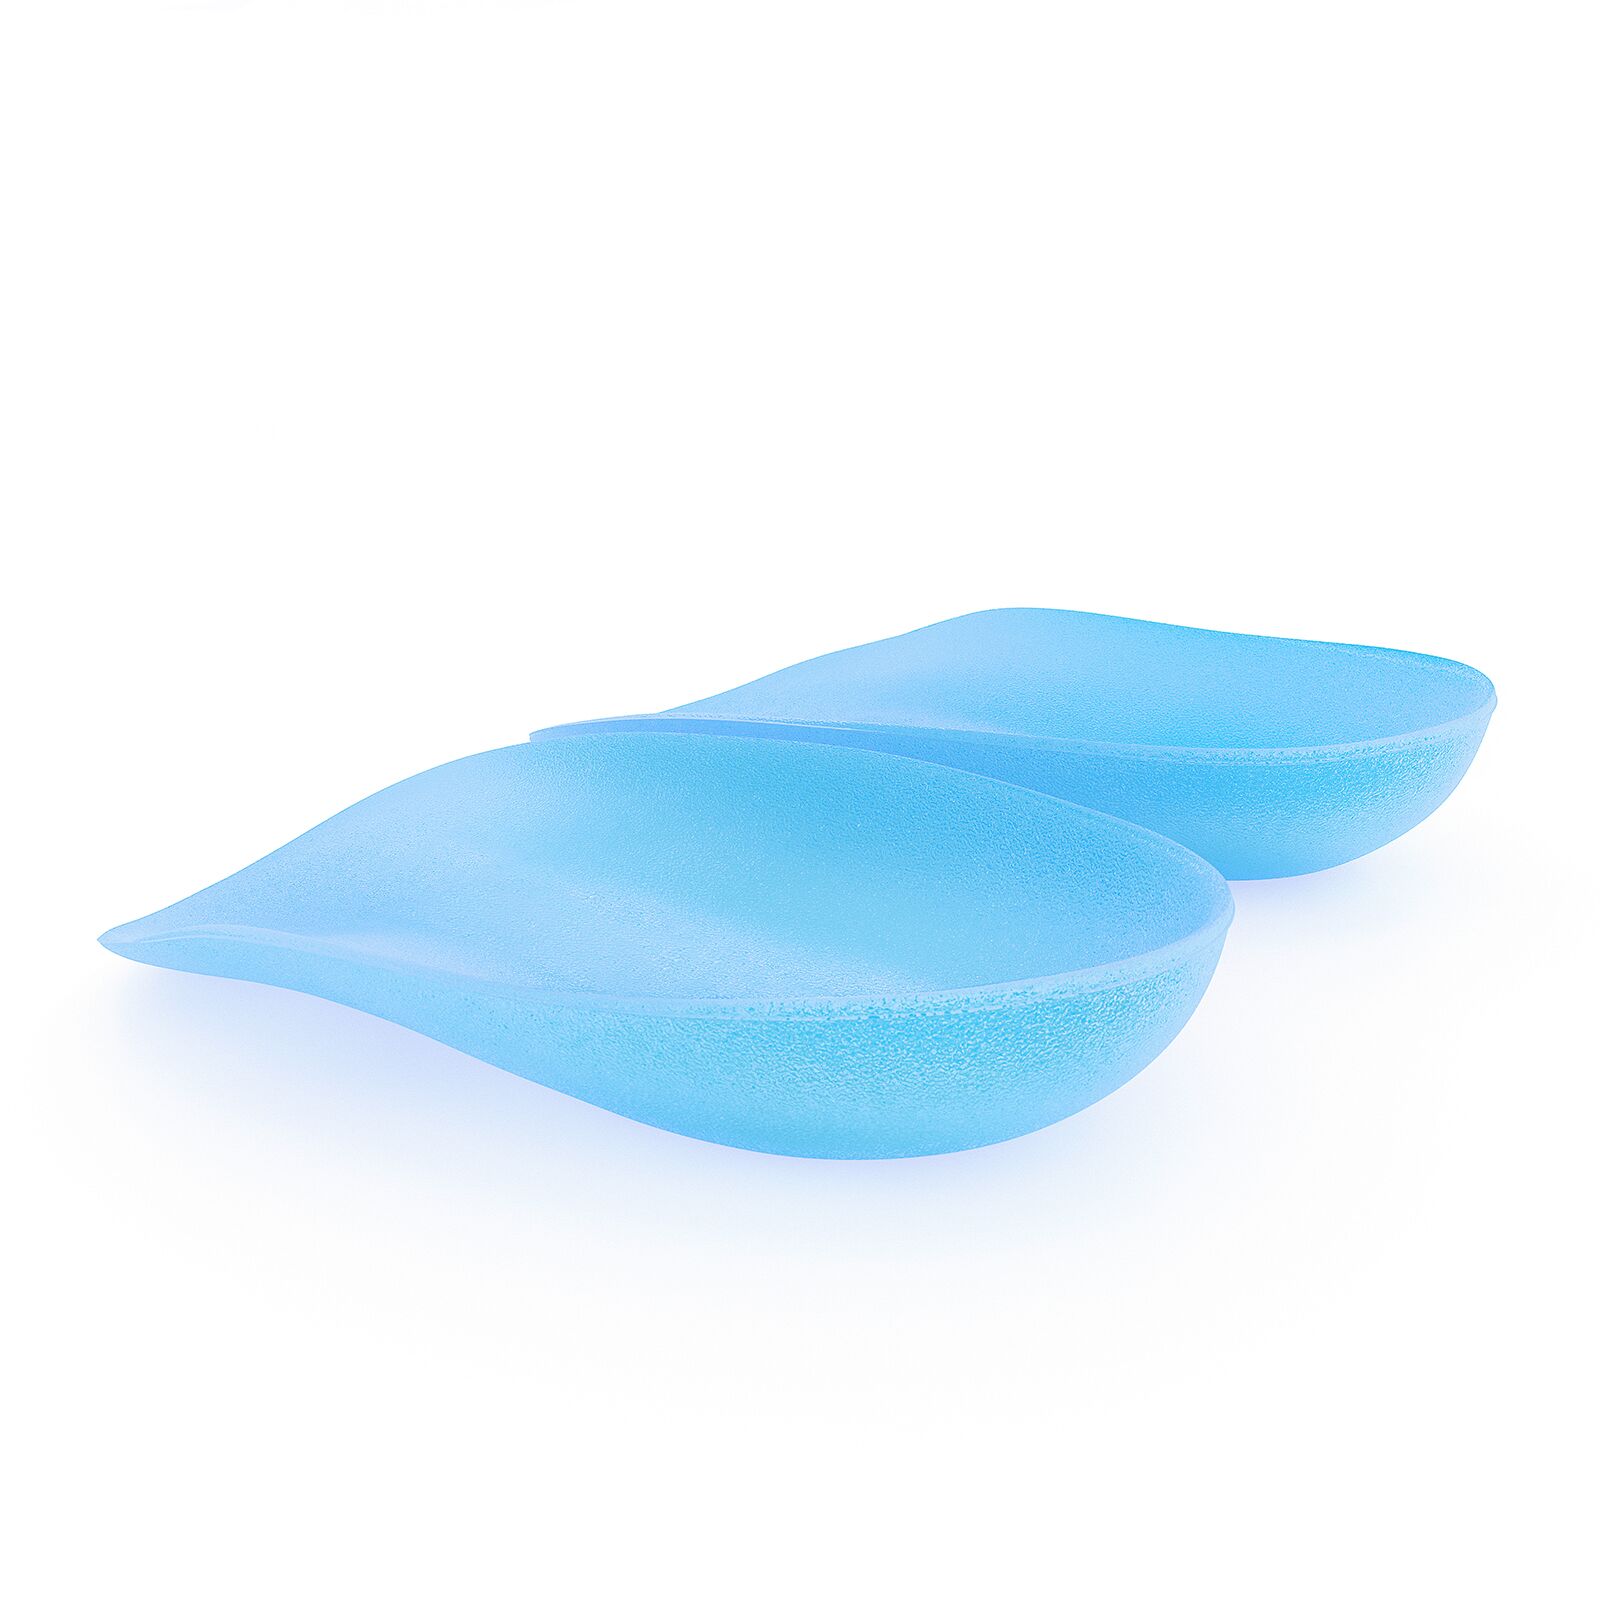 1 Pair Men Women Silicon Gel Heel Cushion Insoles Soles Relieve Foot Pain  Protectors Spur Support